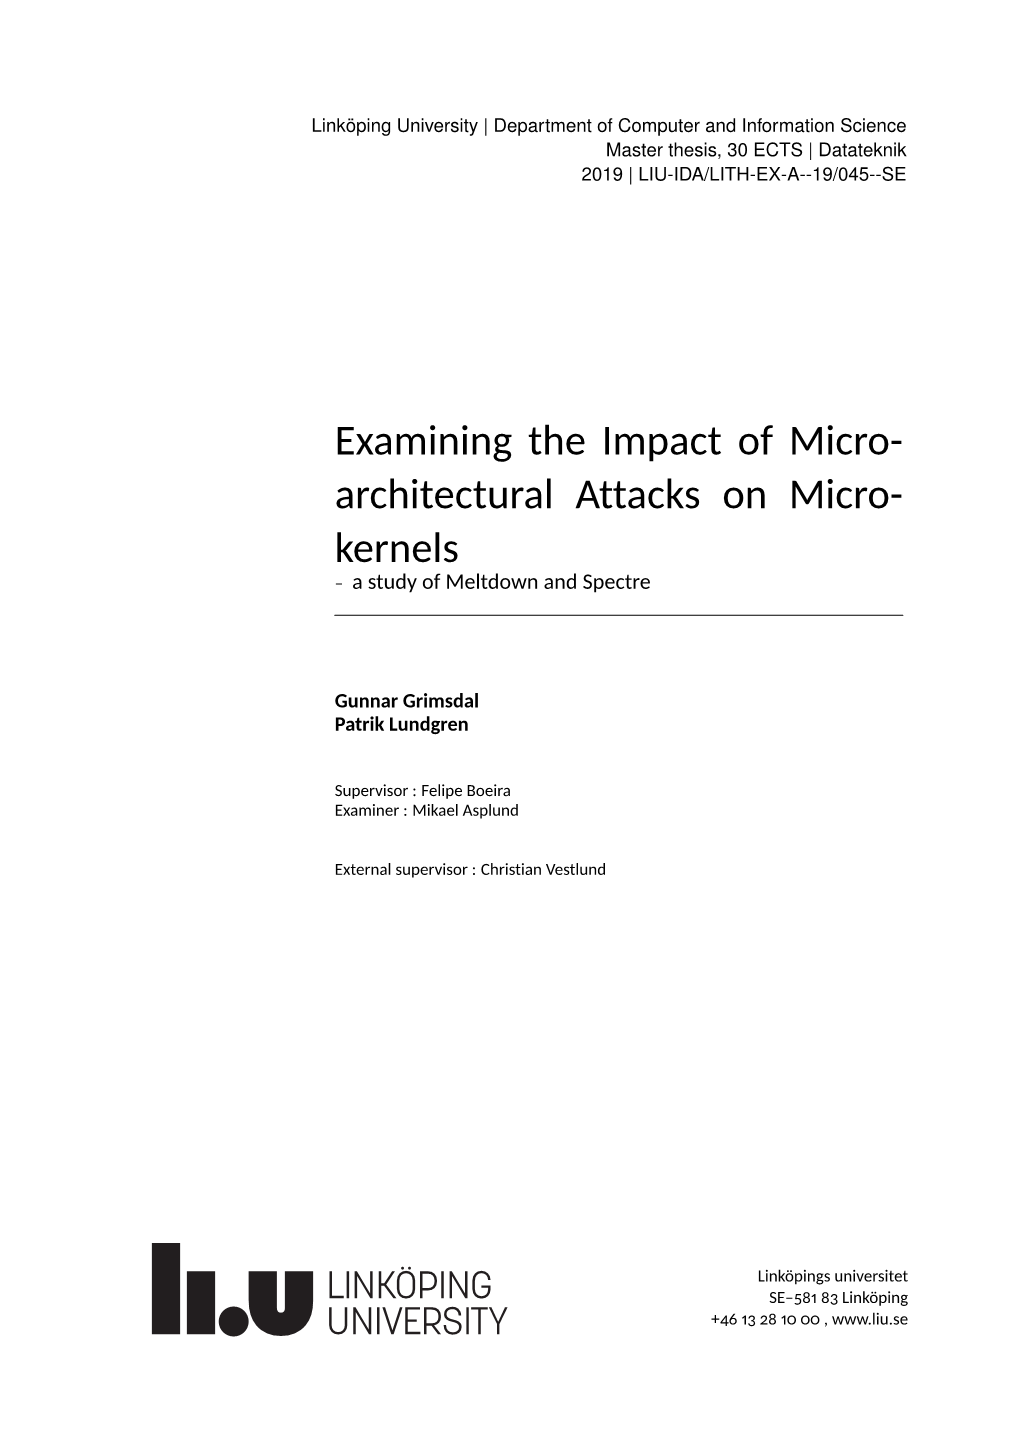 Examining the Impact of Micro- Architectural Attacks on Micro- Kernels – a Study of Meltdown and Spectre